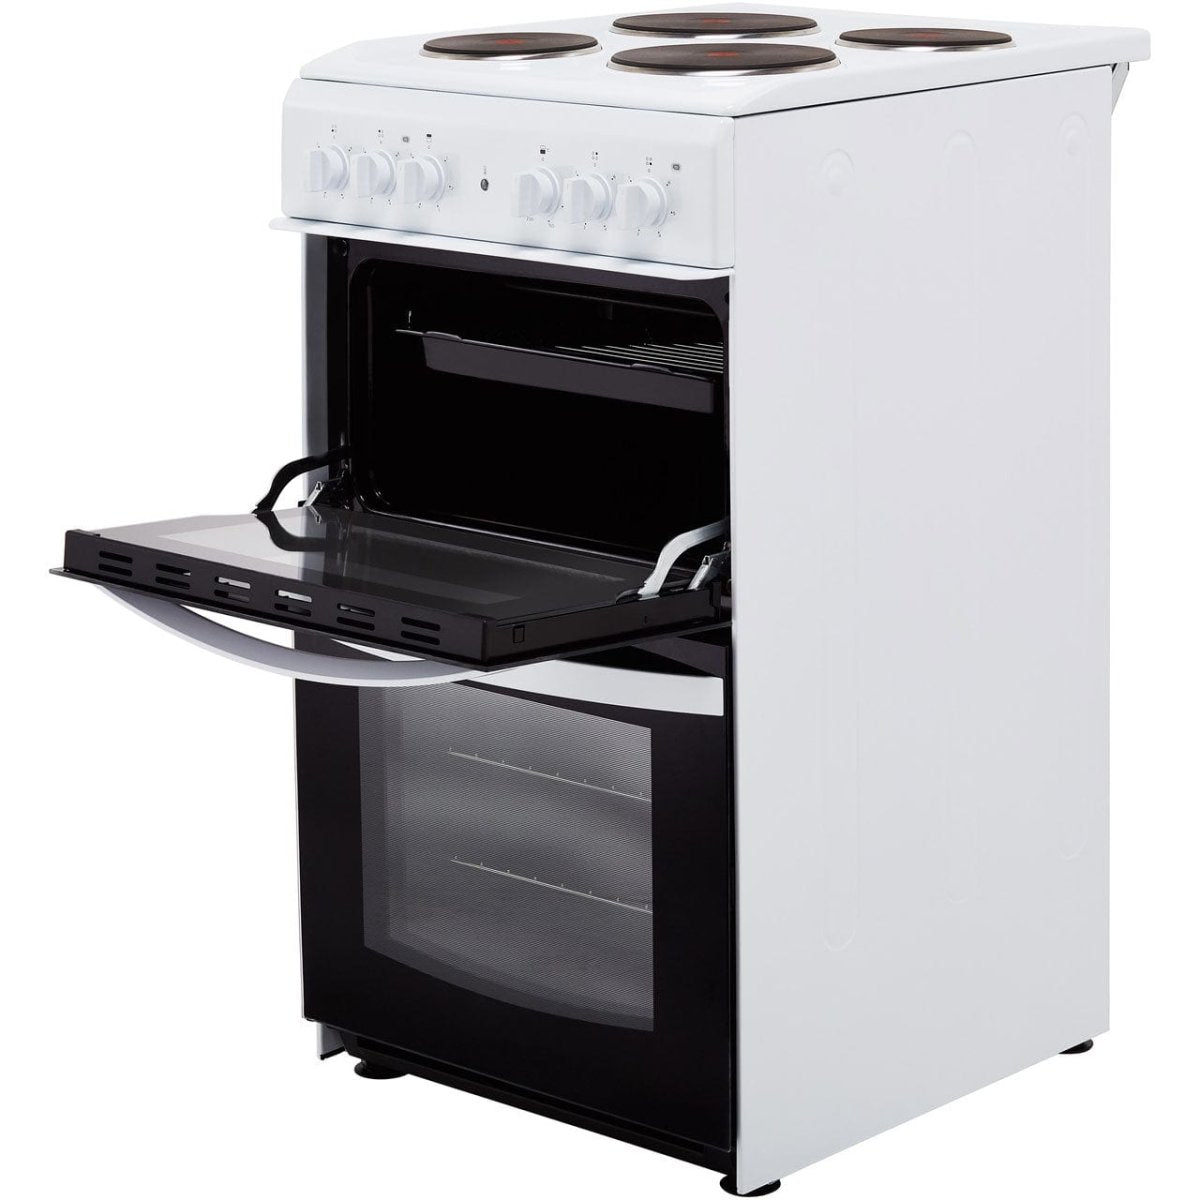 Indesit Cloe ID5E92KMW 50cm Electric Cooker with Solid Plate Hob - White - A Rated - Atlantic Electrics